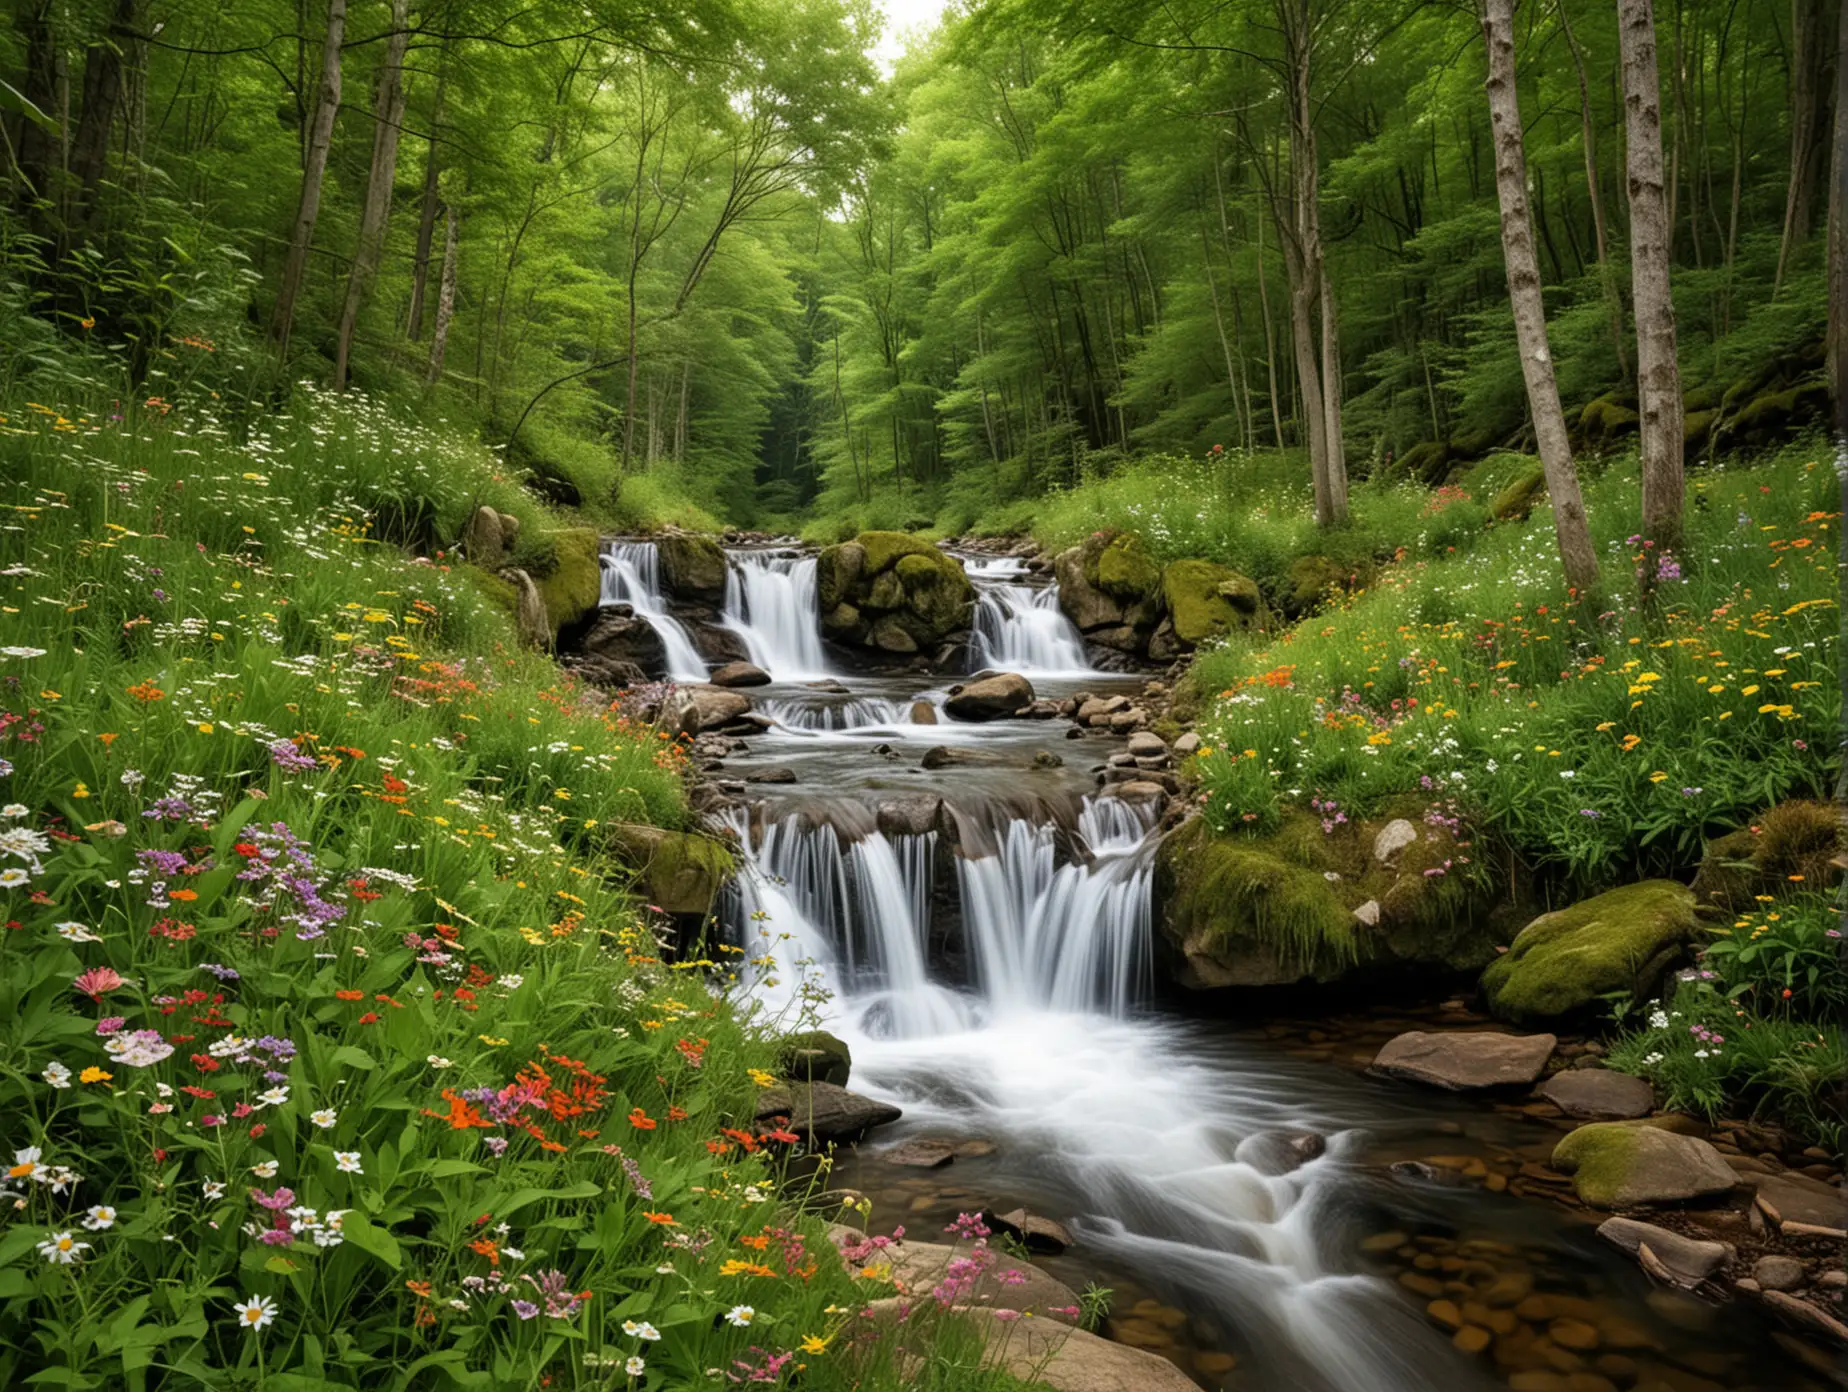 Wildflowers-by-a-Serene-Forest-Stream-Natures-Relaxing-Waterfall-Scene